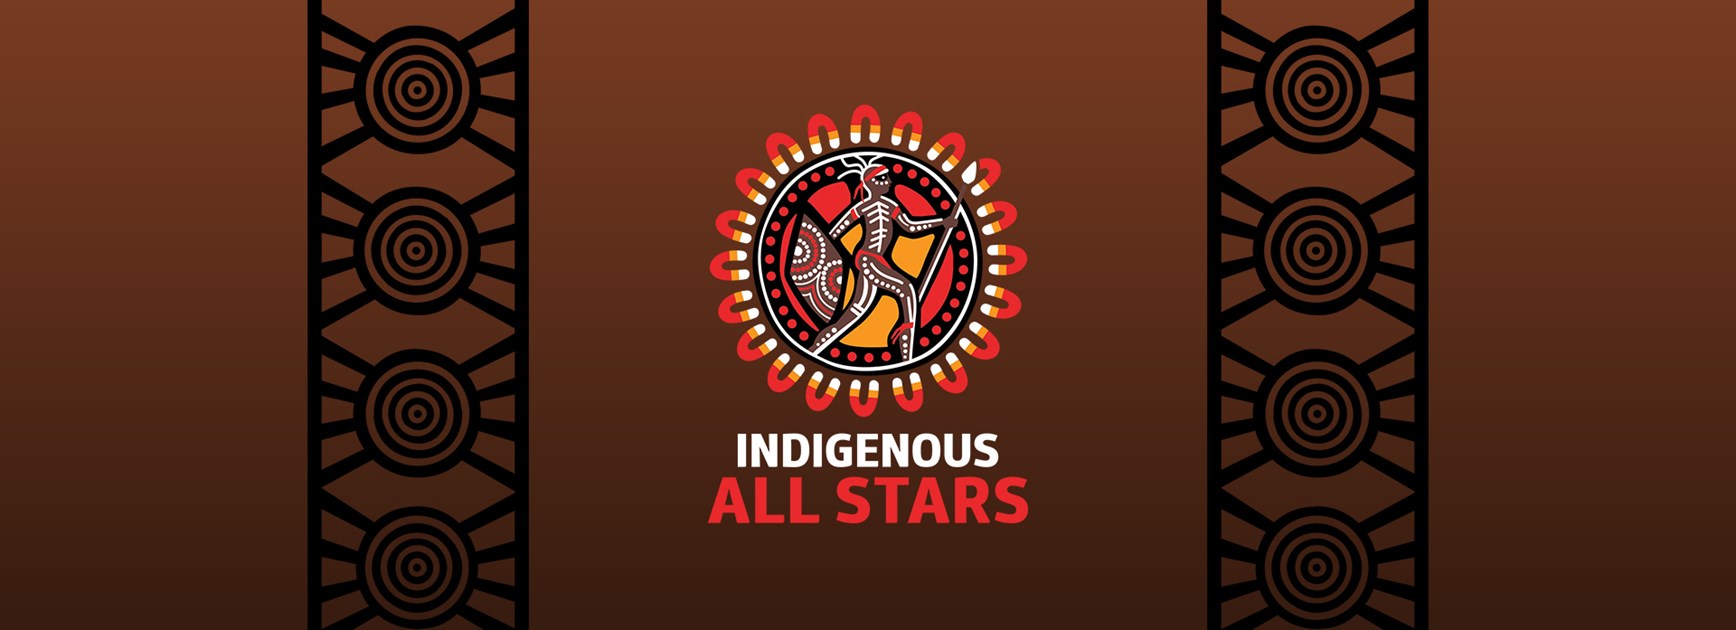 Four Titans selected in Indigenous All Stars team